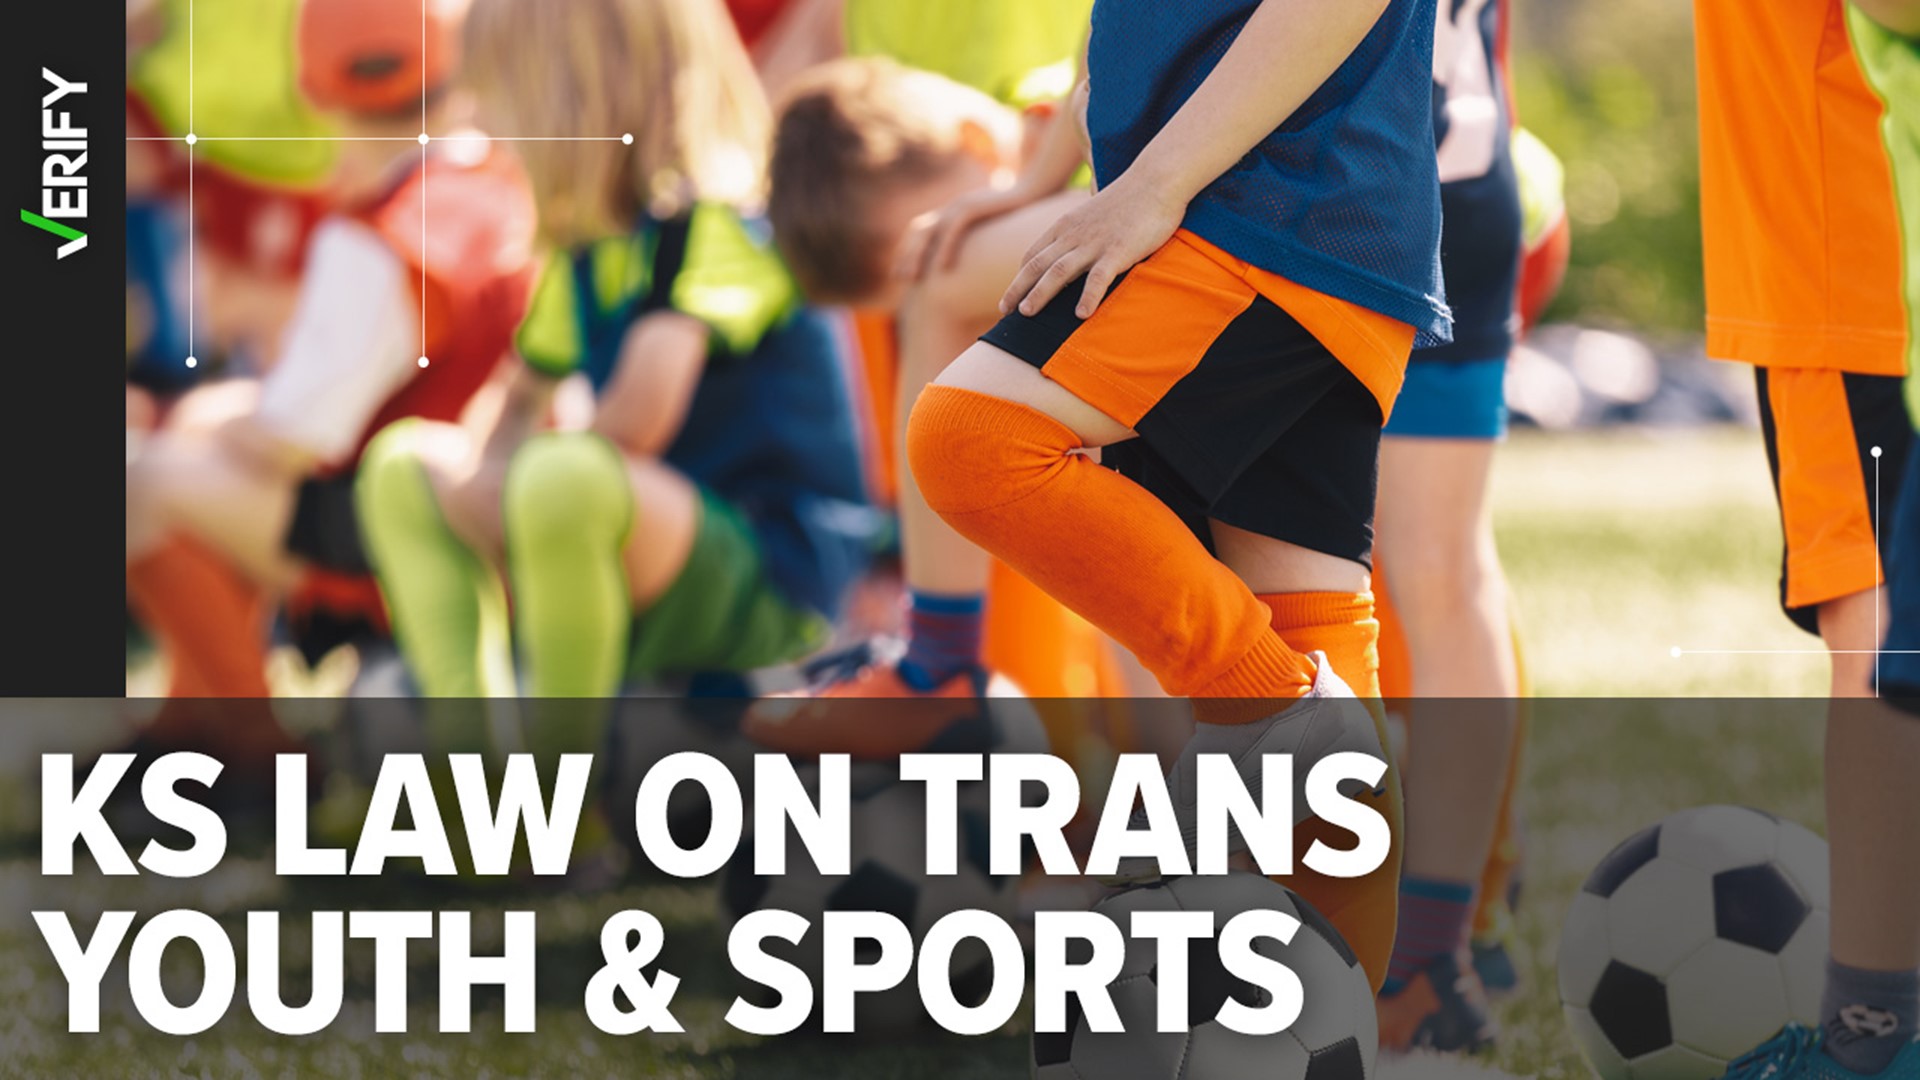 A ban in Kansas on transgender youth in school sports doesn’t mention examinations or inspections, or any other way the ban could be enforced.